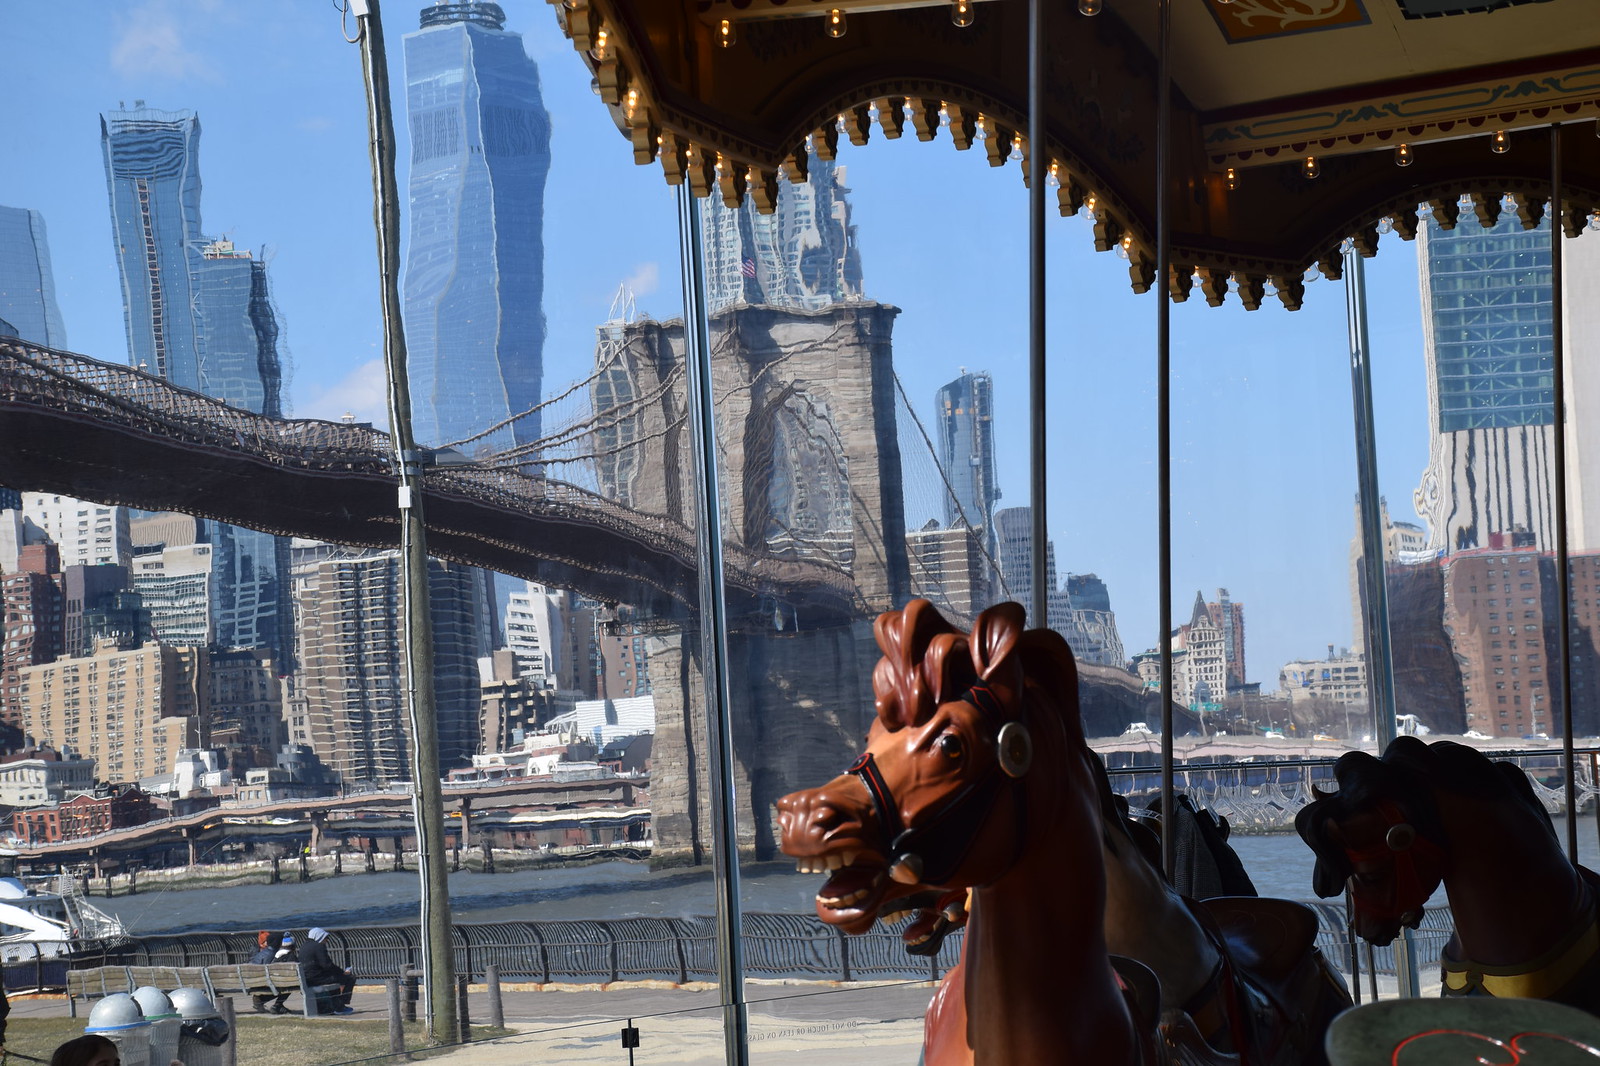 The carousel is just by the Brooklyn Bridge